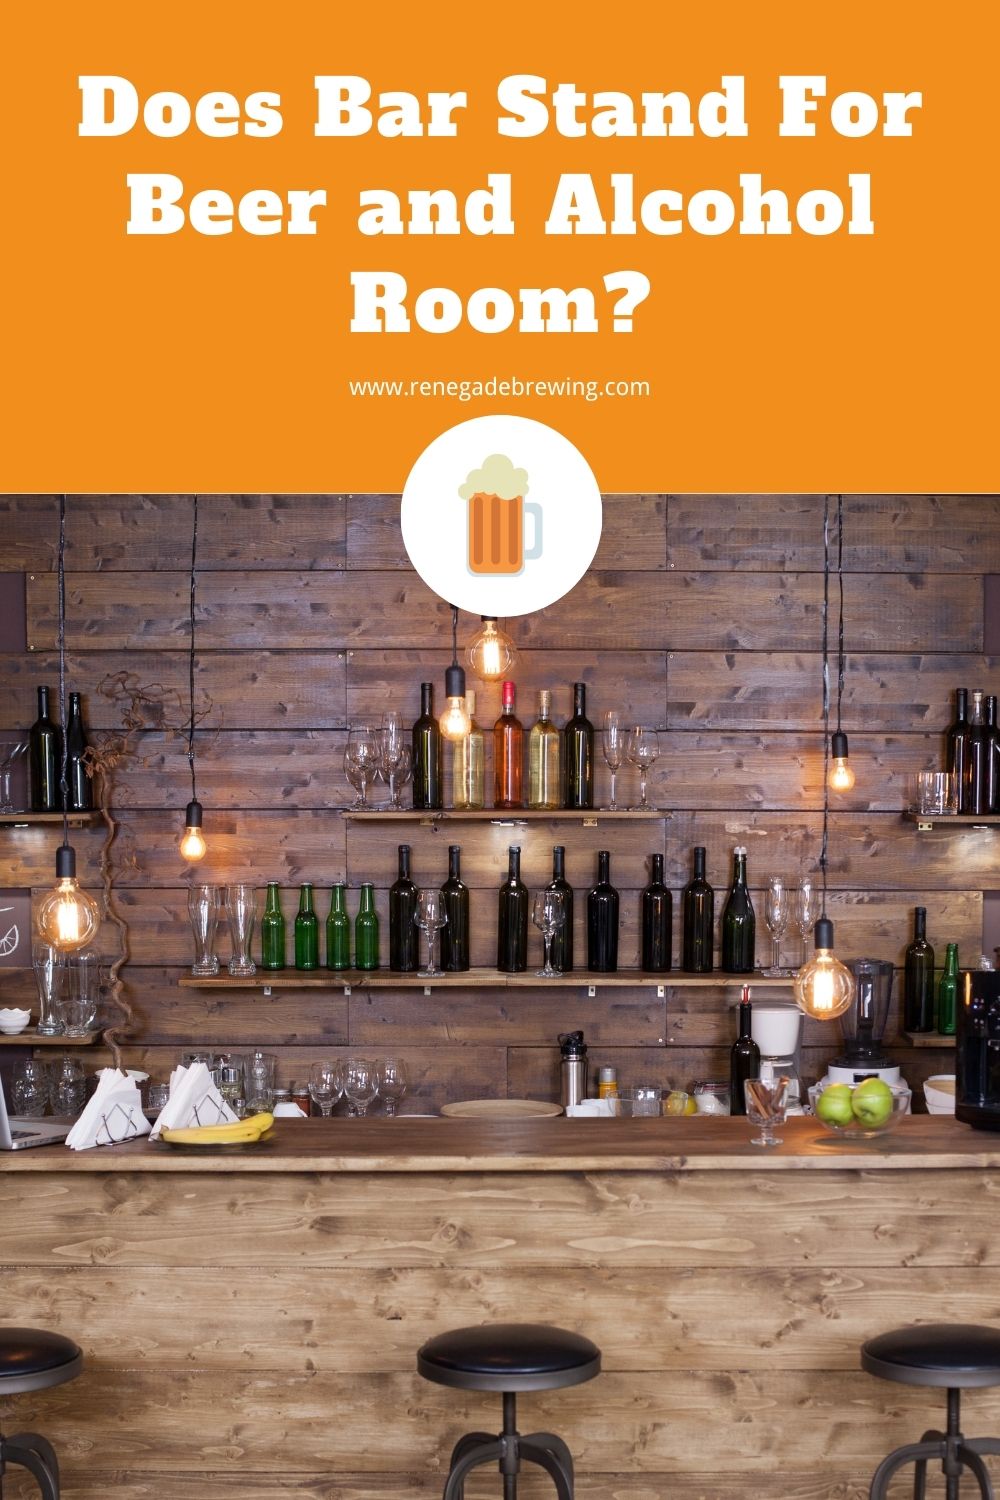 Does Bar Stand For Beer and Alcohol Room 2